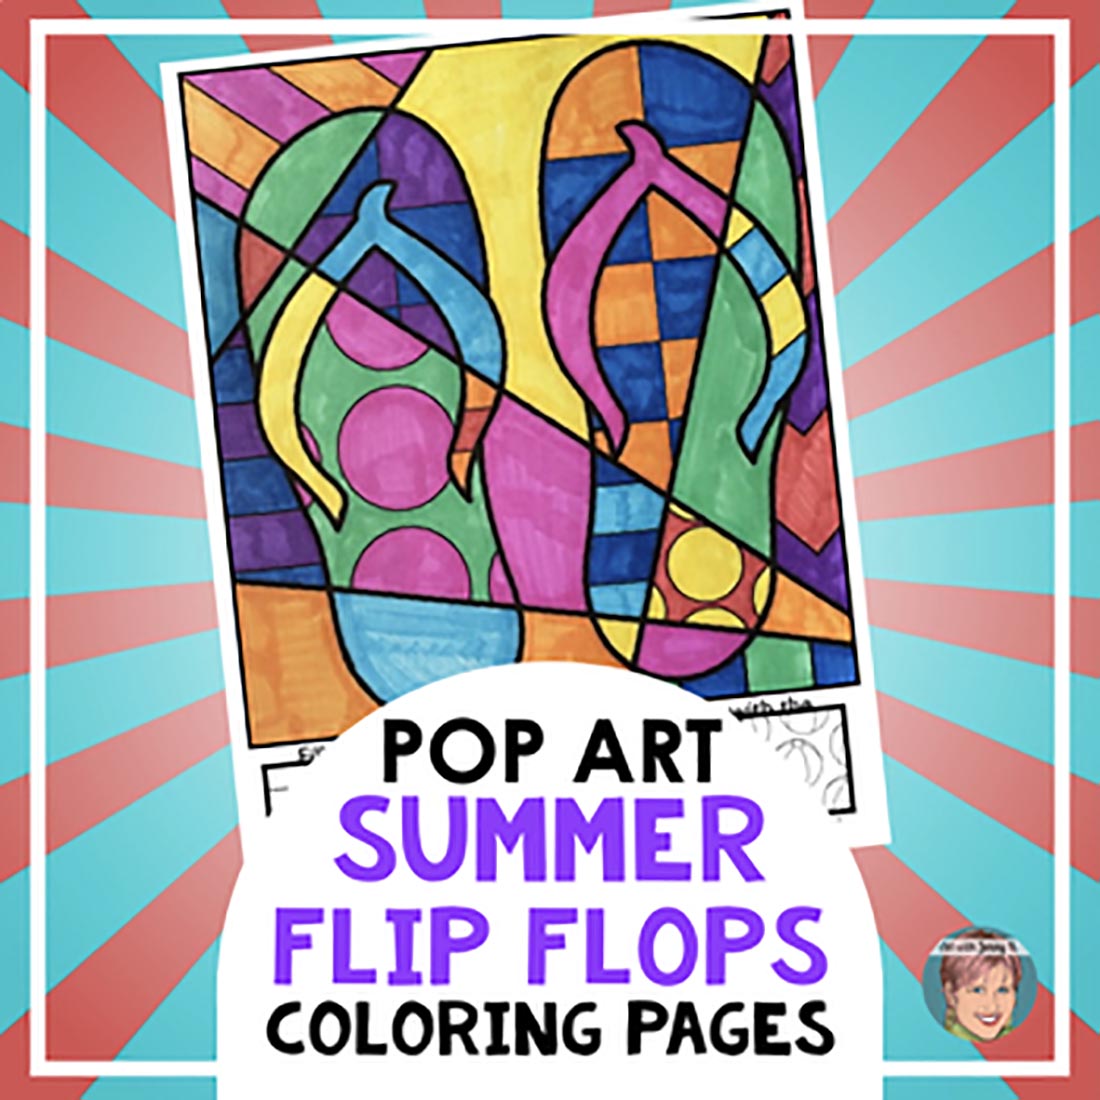 Flip Flop Coloring Pages | Great Start of the Year or Summer Activity! cover image.